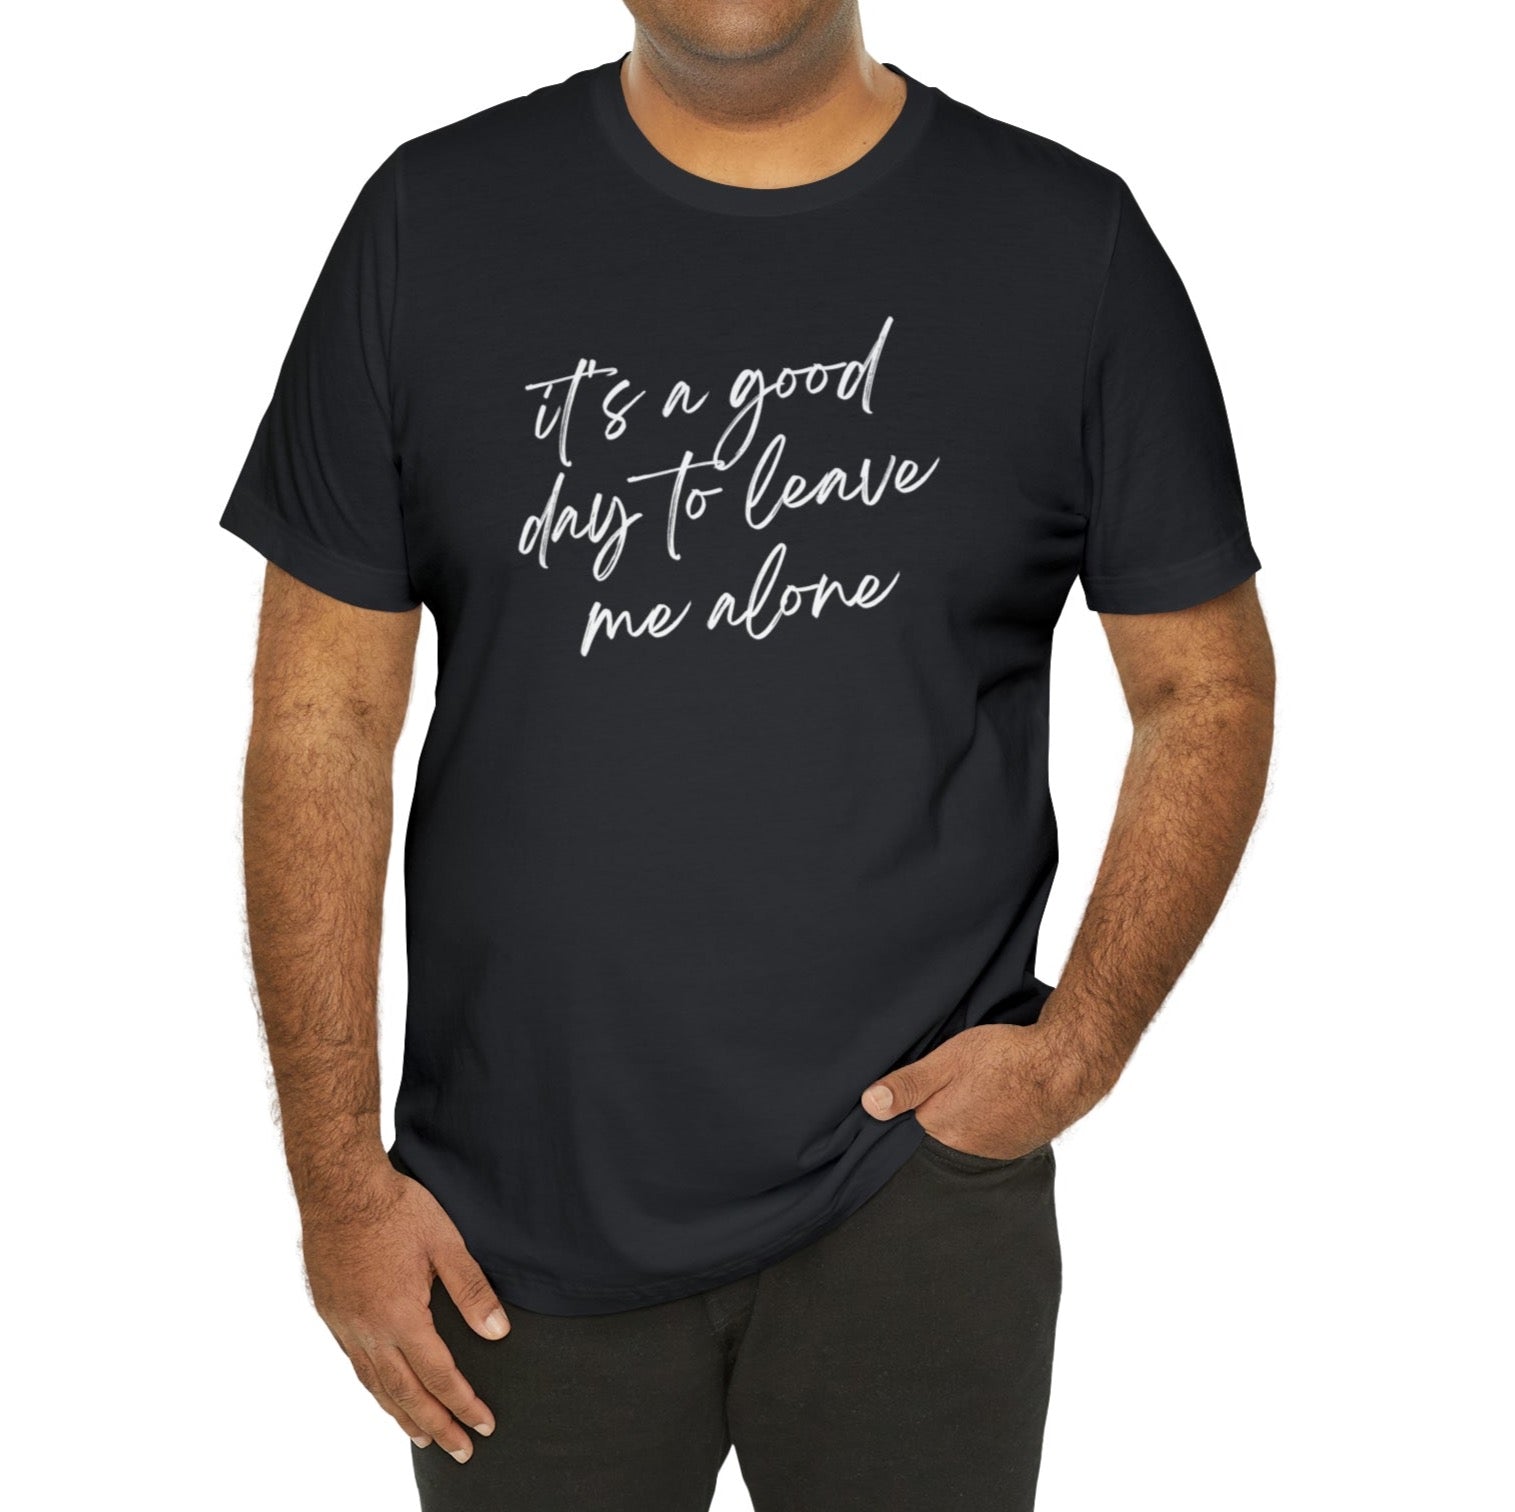 It's a good day to leave me alone Jersey Short Sleeve Tee